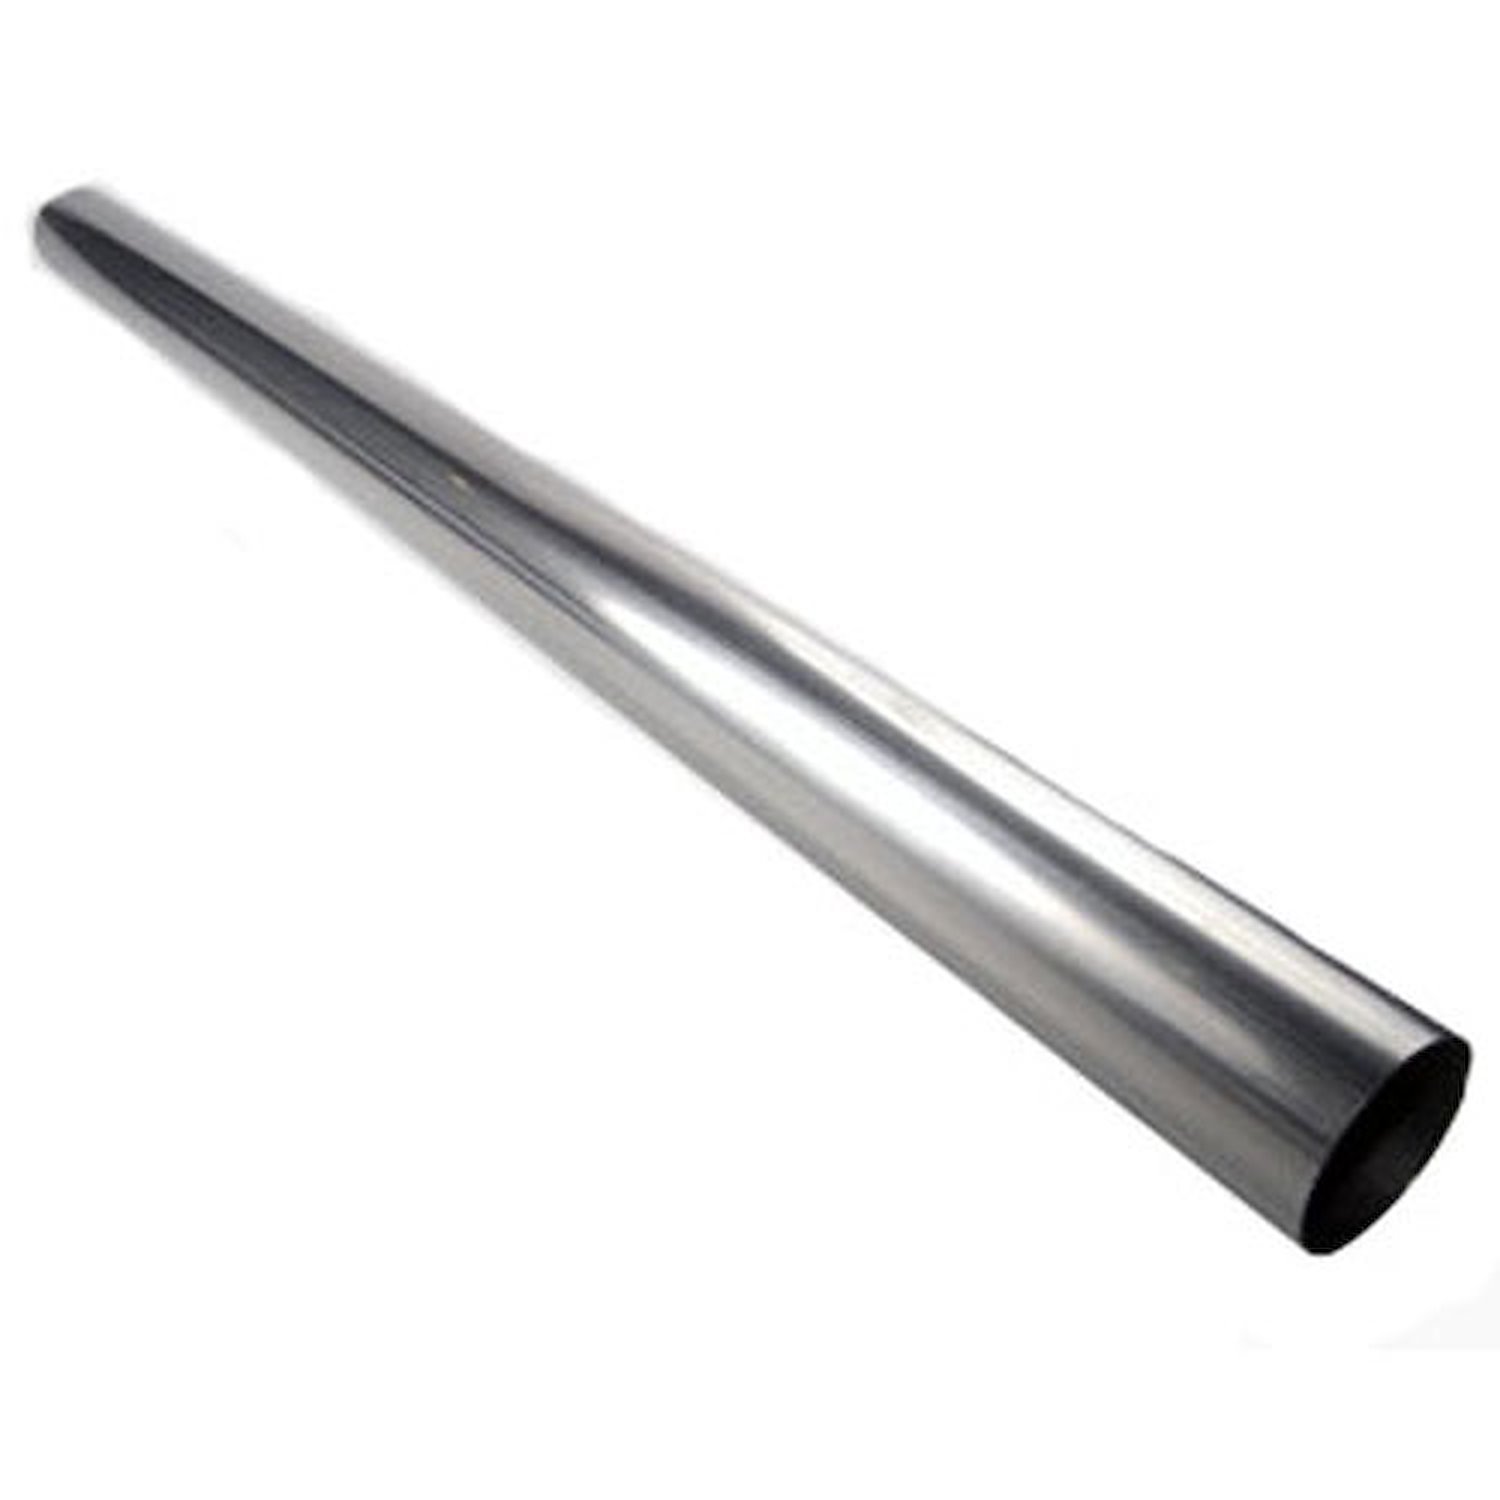 T304 Stainless Exhaust Tubing 3.50" OD x 7.5" L